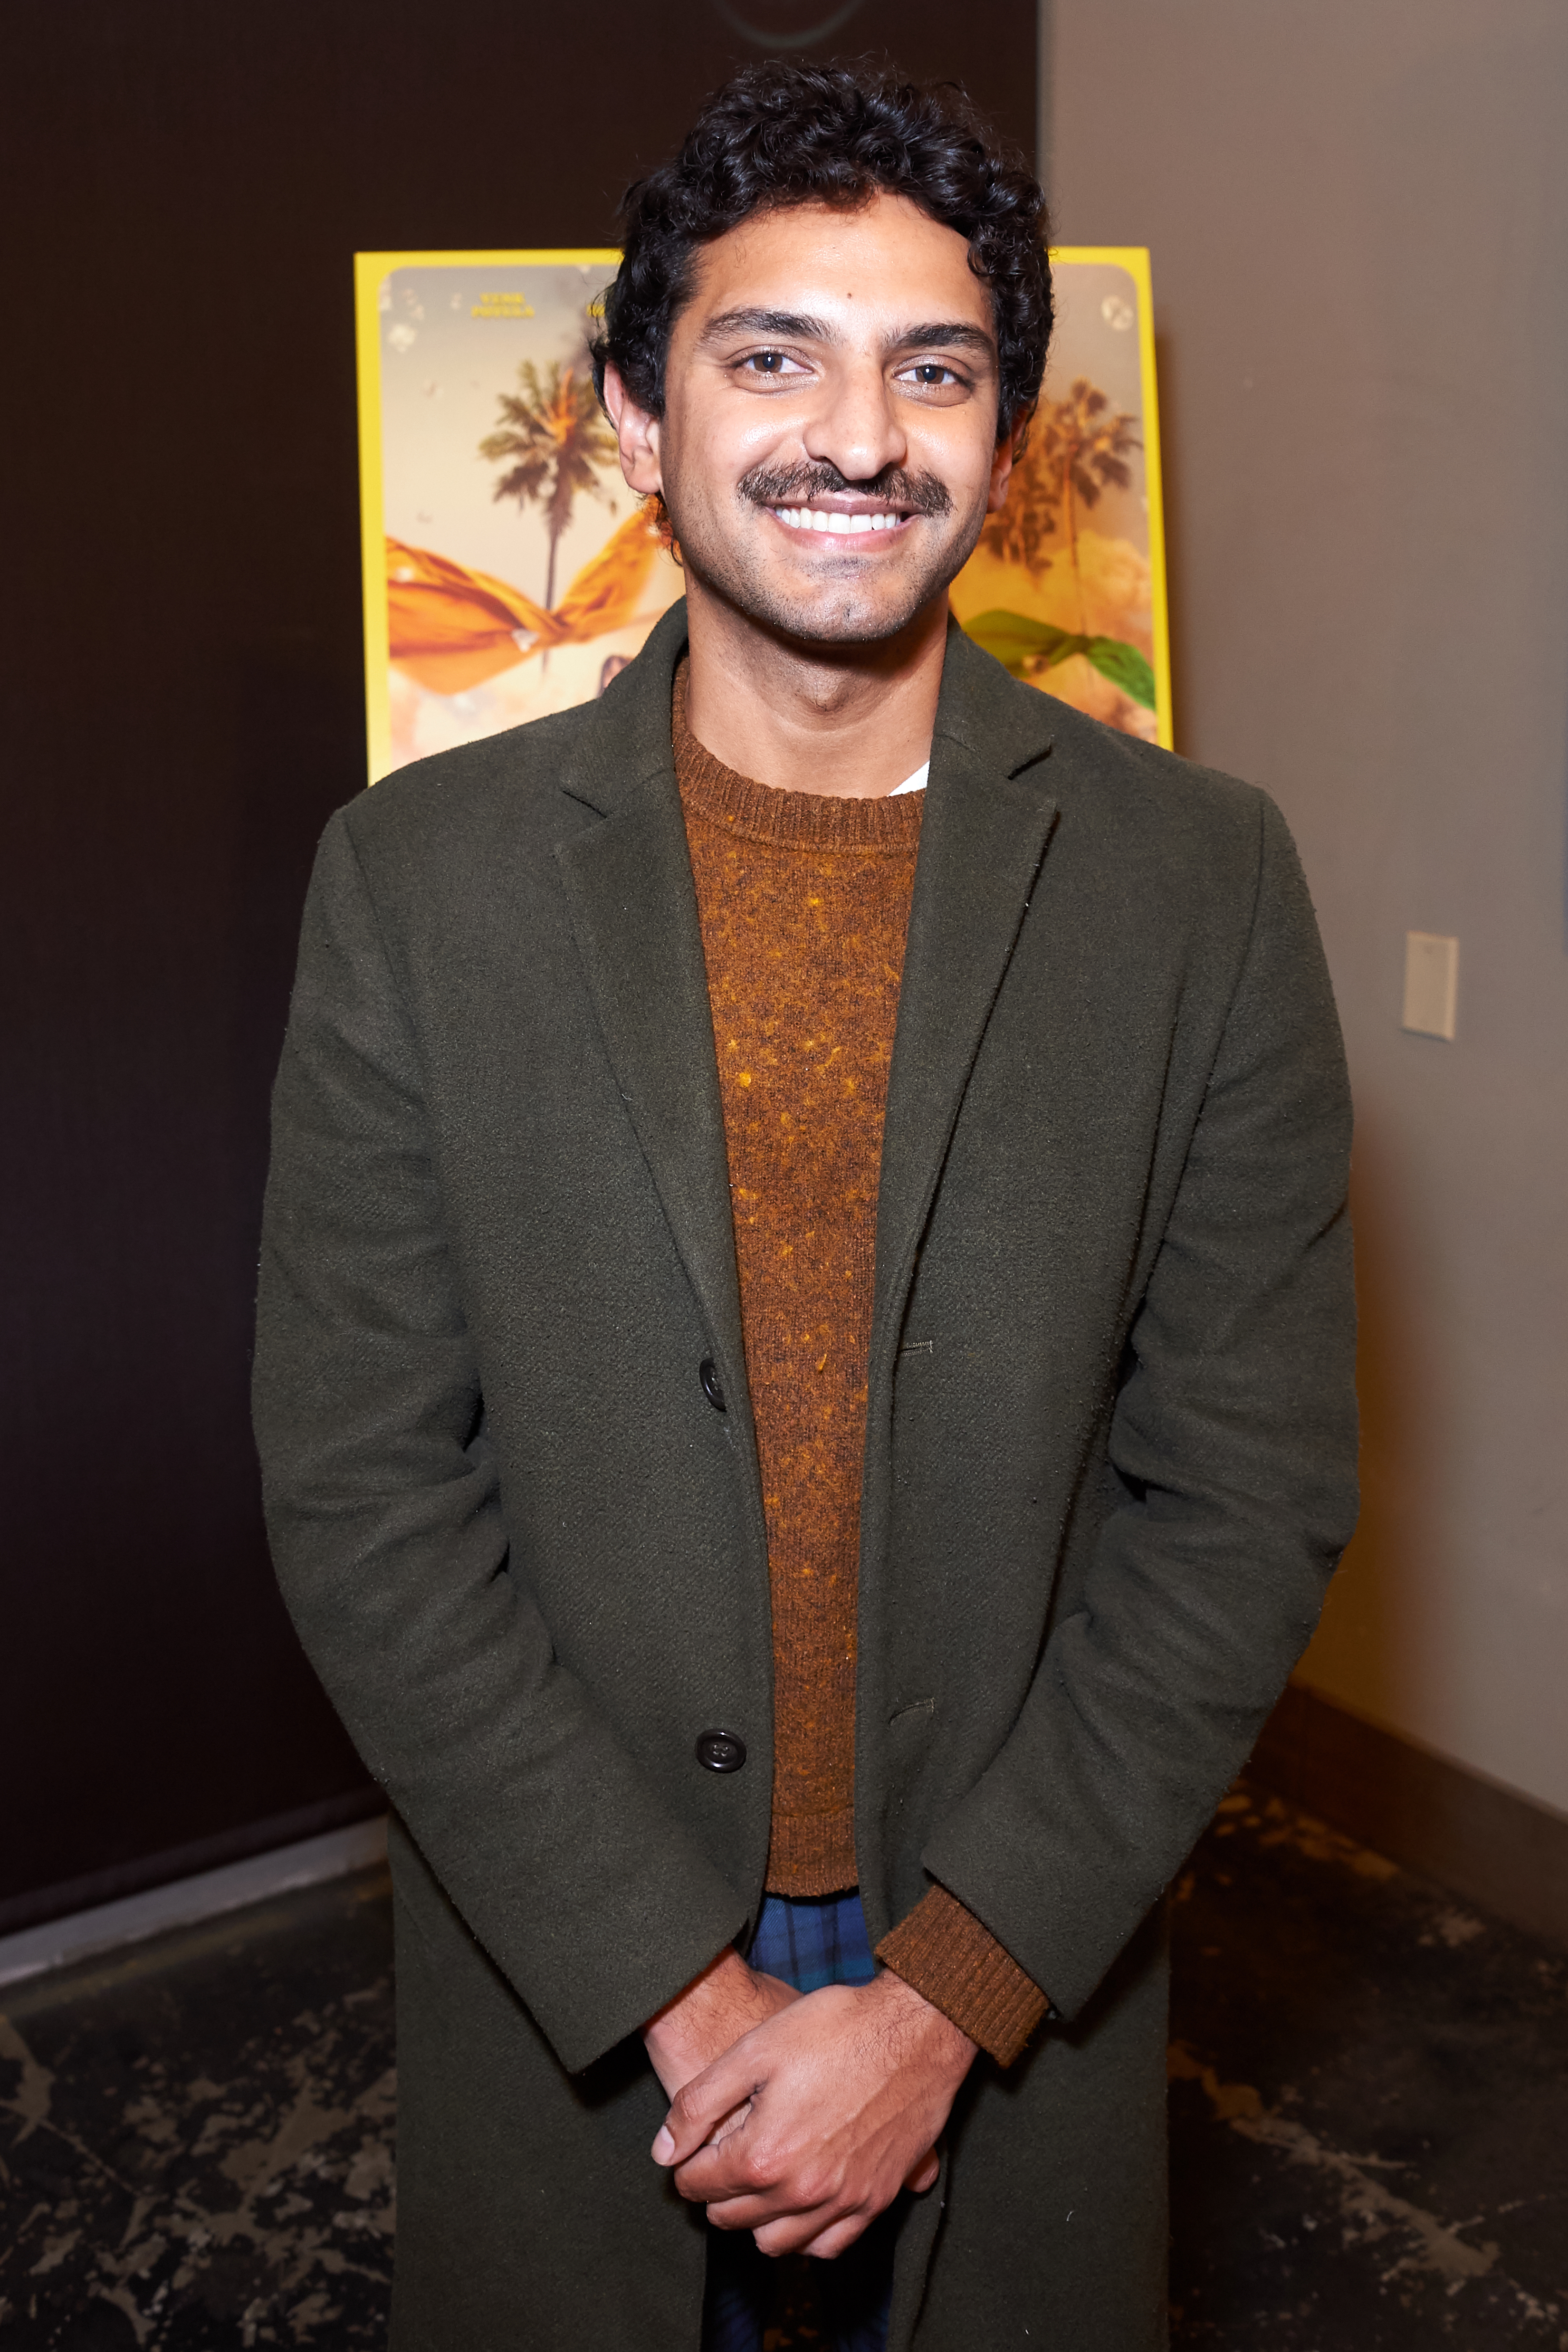 Karan Soni poses at the Los Angeles theatrical premiere of "Four Samosas" at Laemmle NoHo 7 on December 2, 2022, in North Hollywood, California | Source: Getty Images